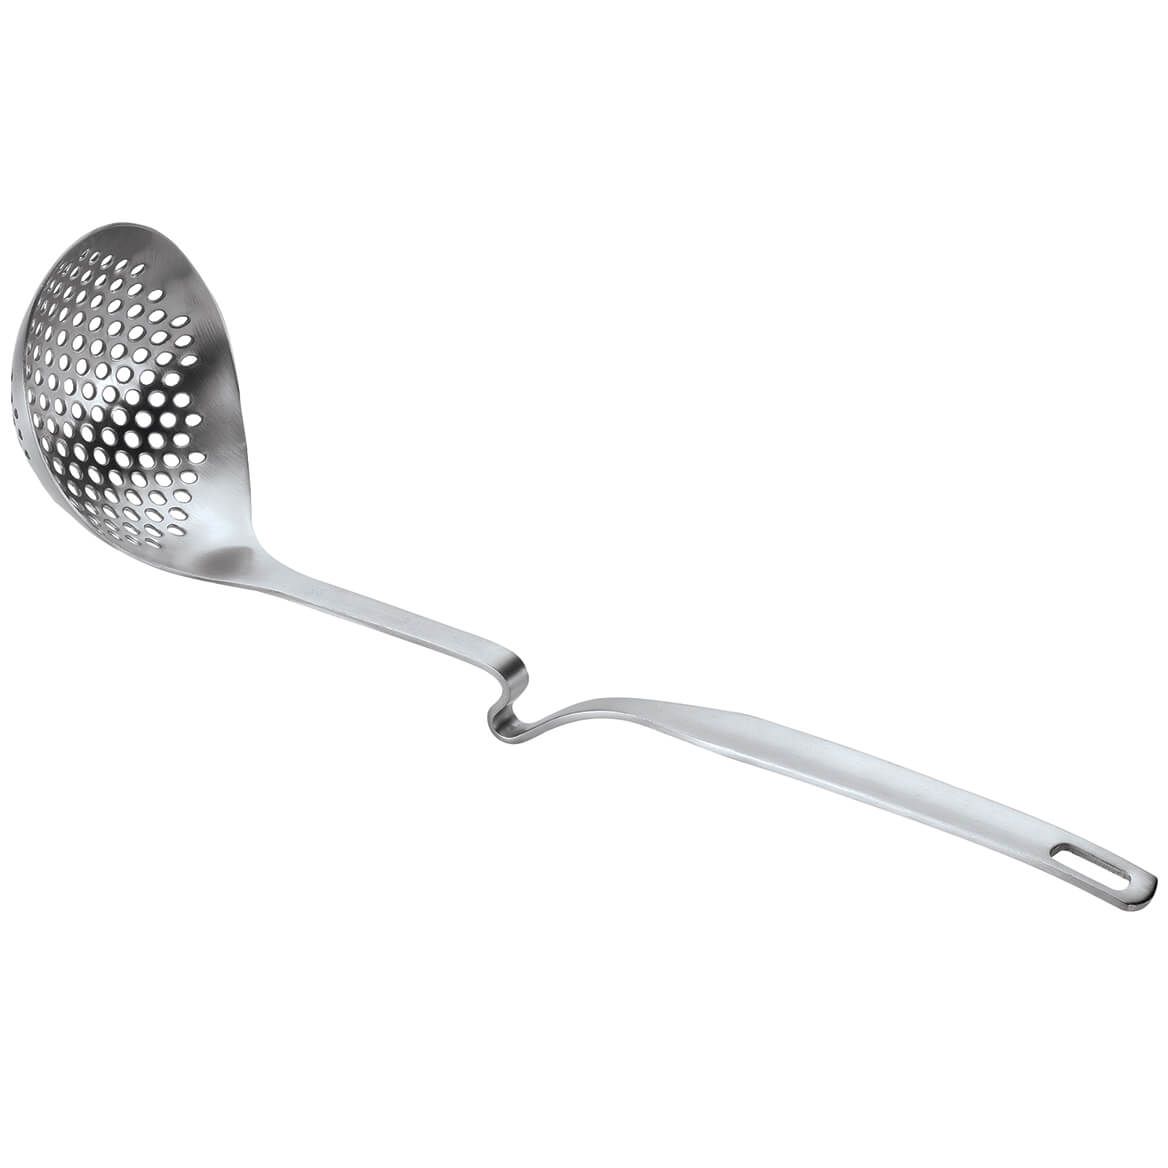 Stainless Steel Slotted Ladle with Rim Rest + '-' + 372009